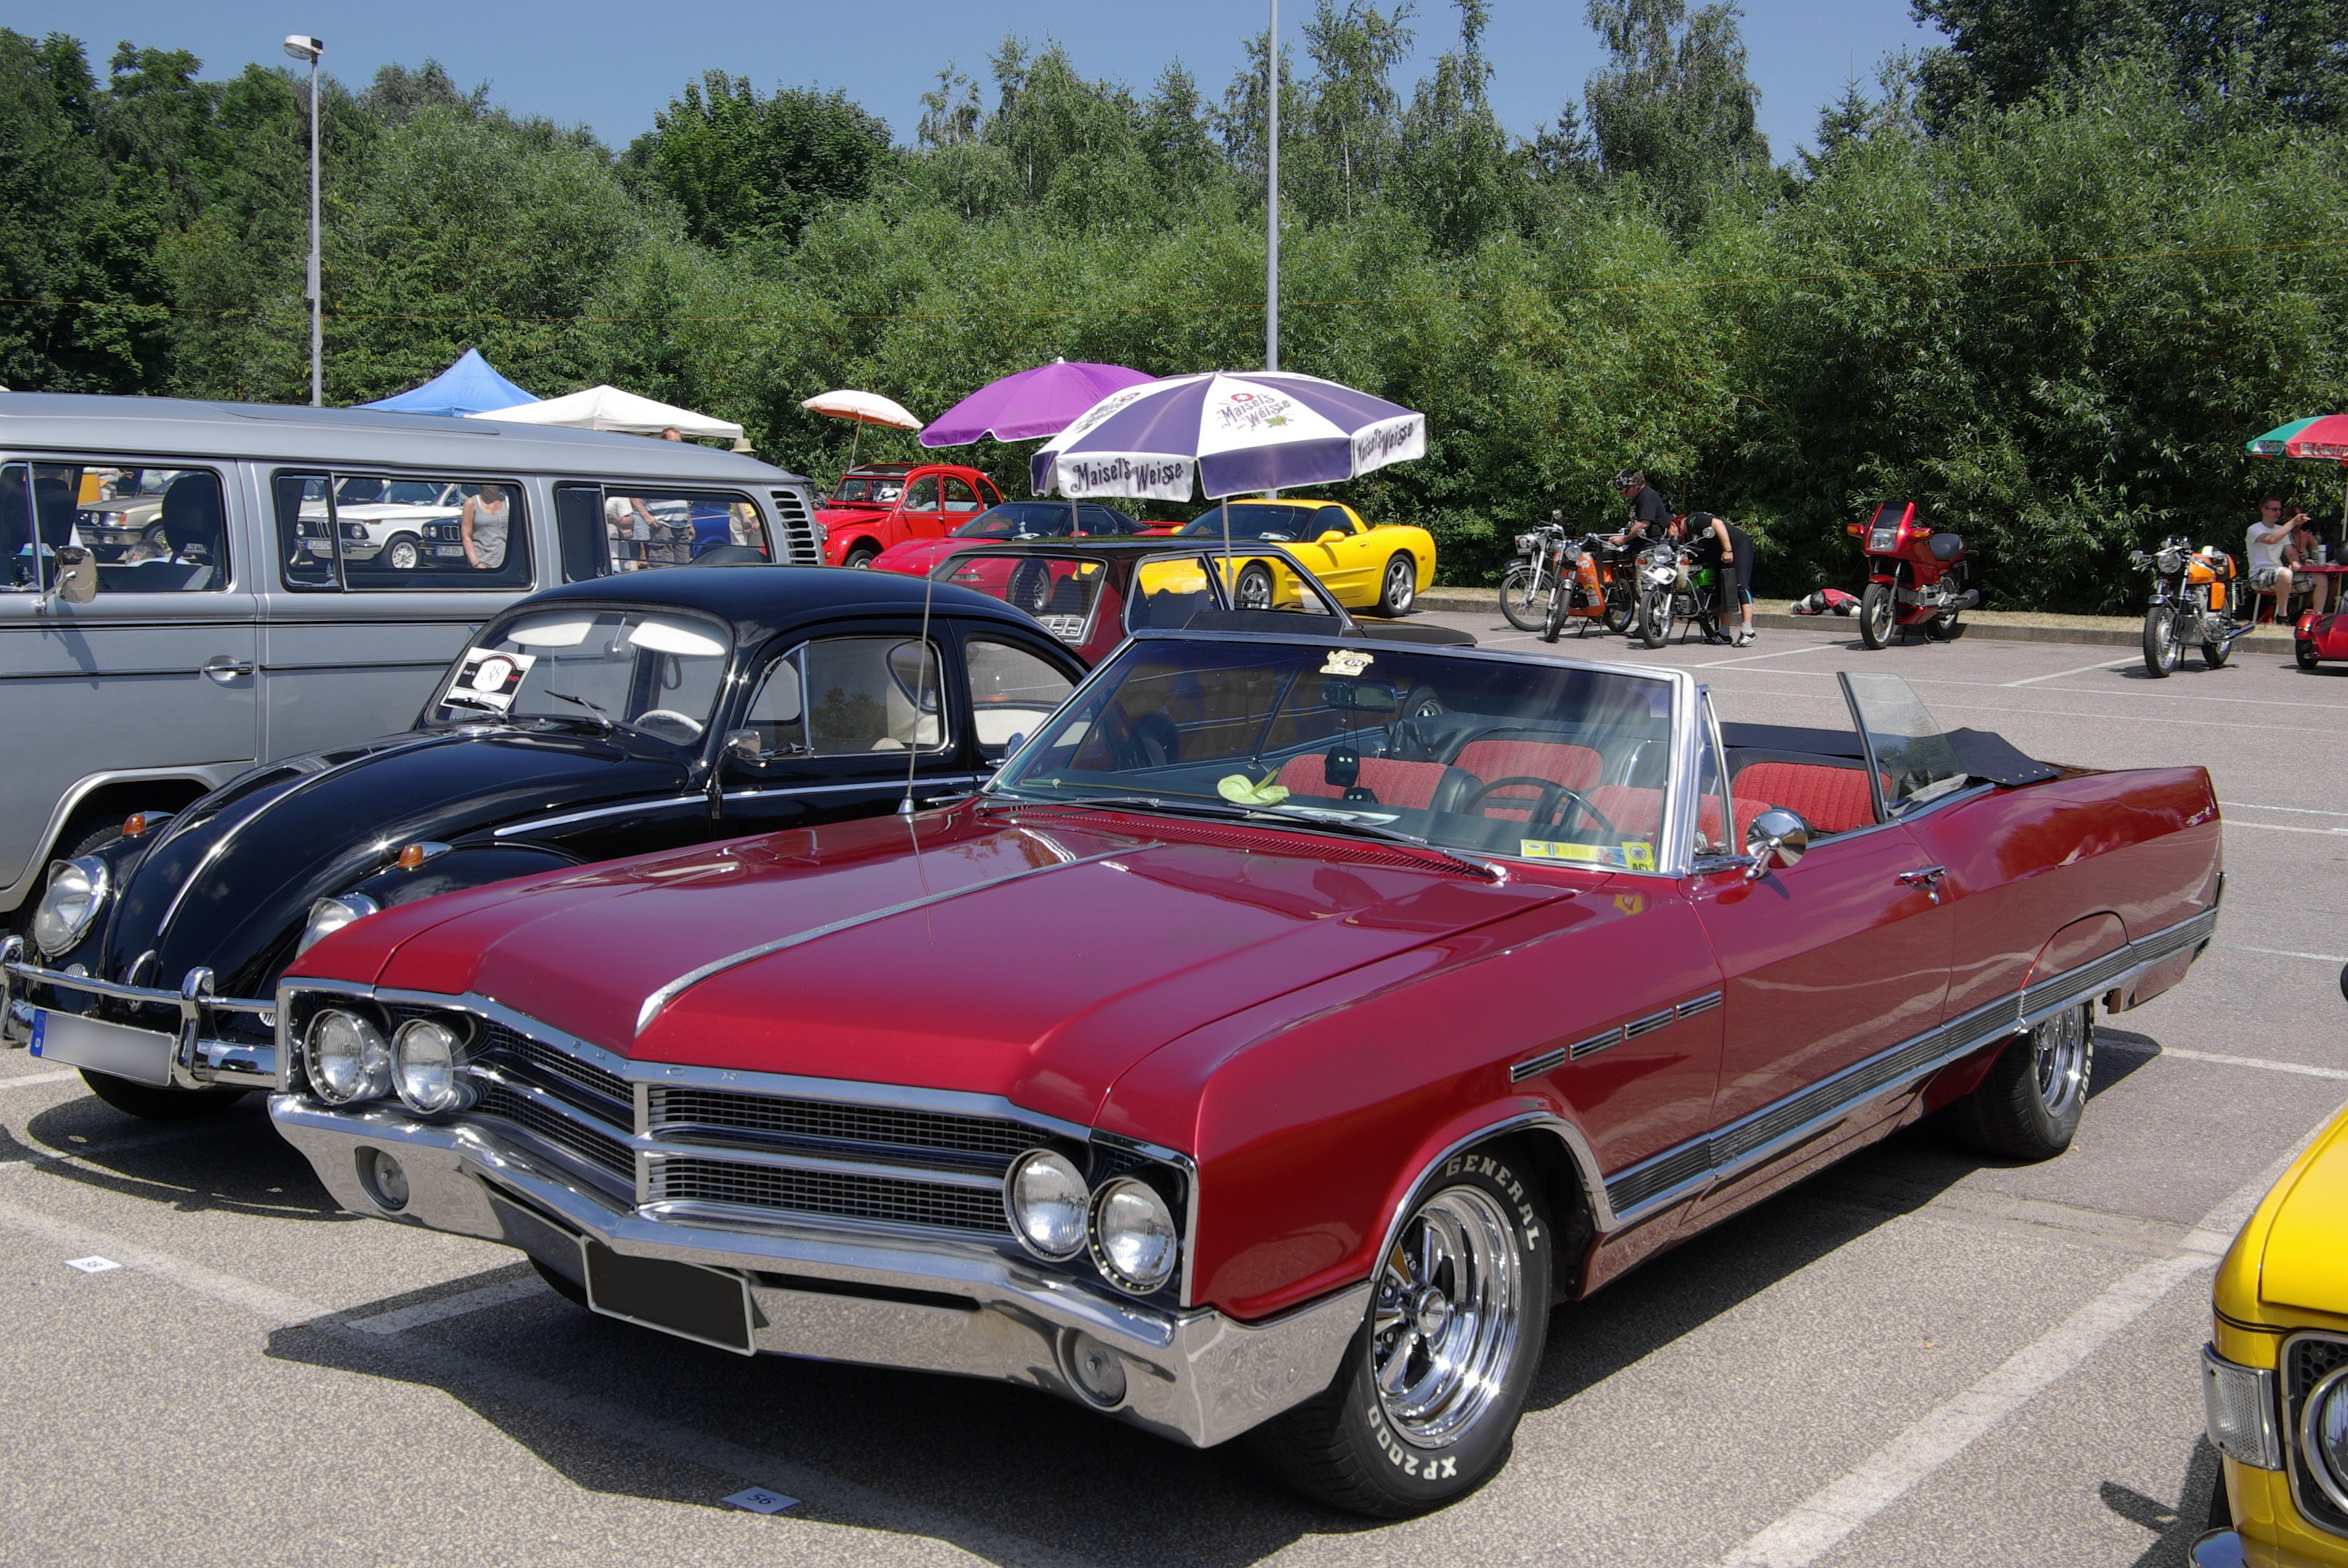 Buick Electra 225 2013-07-21 13-53-23